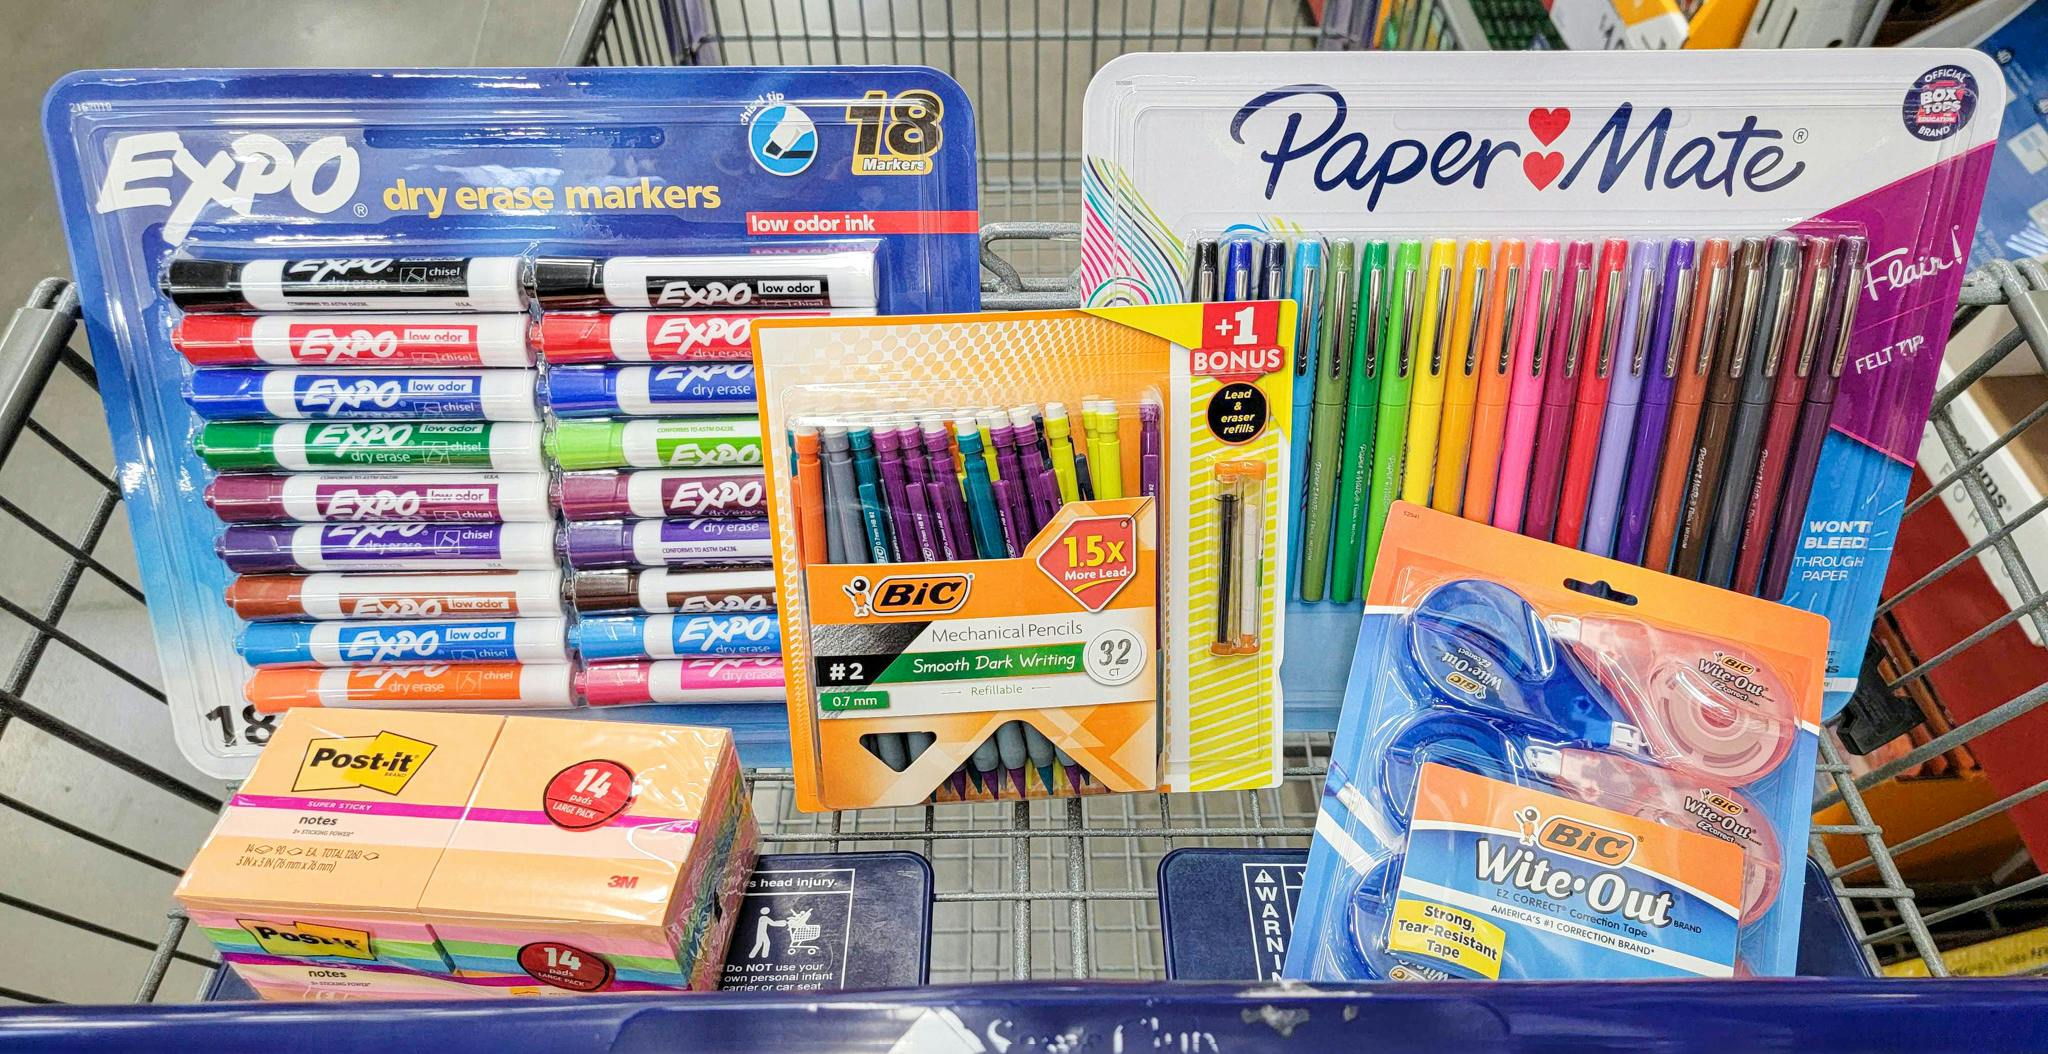 Back to School: How much will supplies cost you?